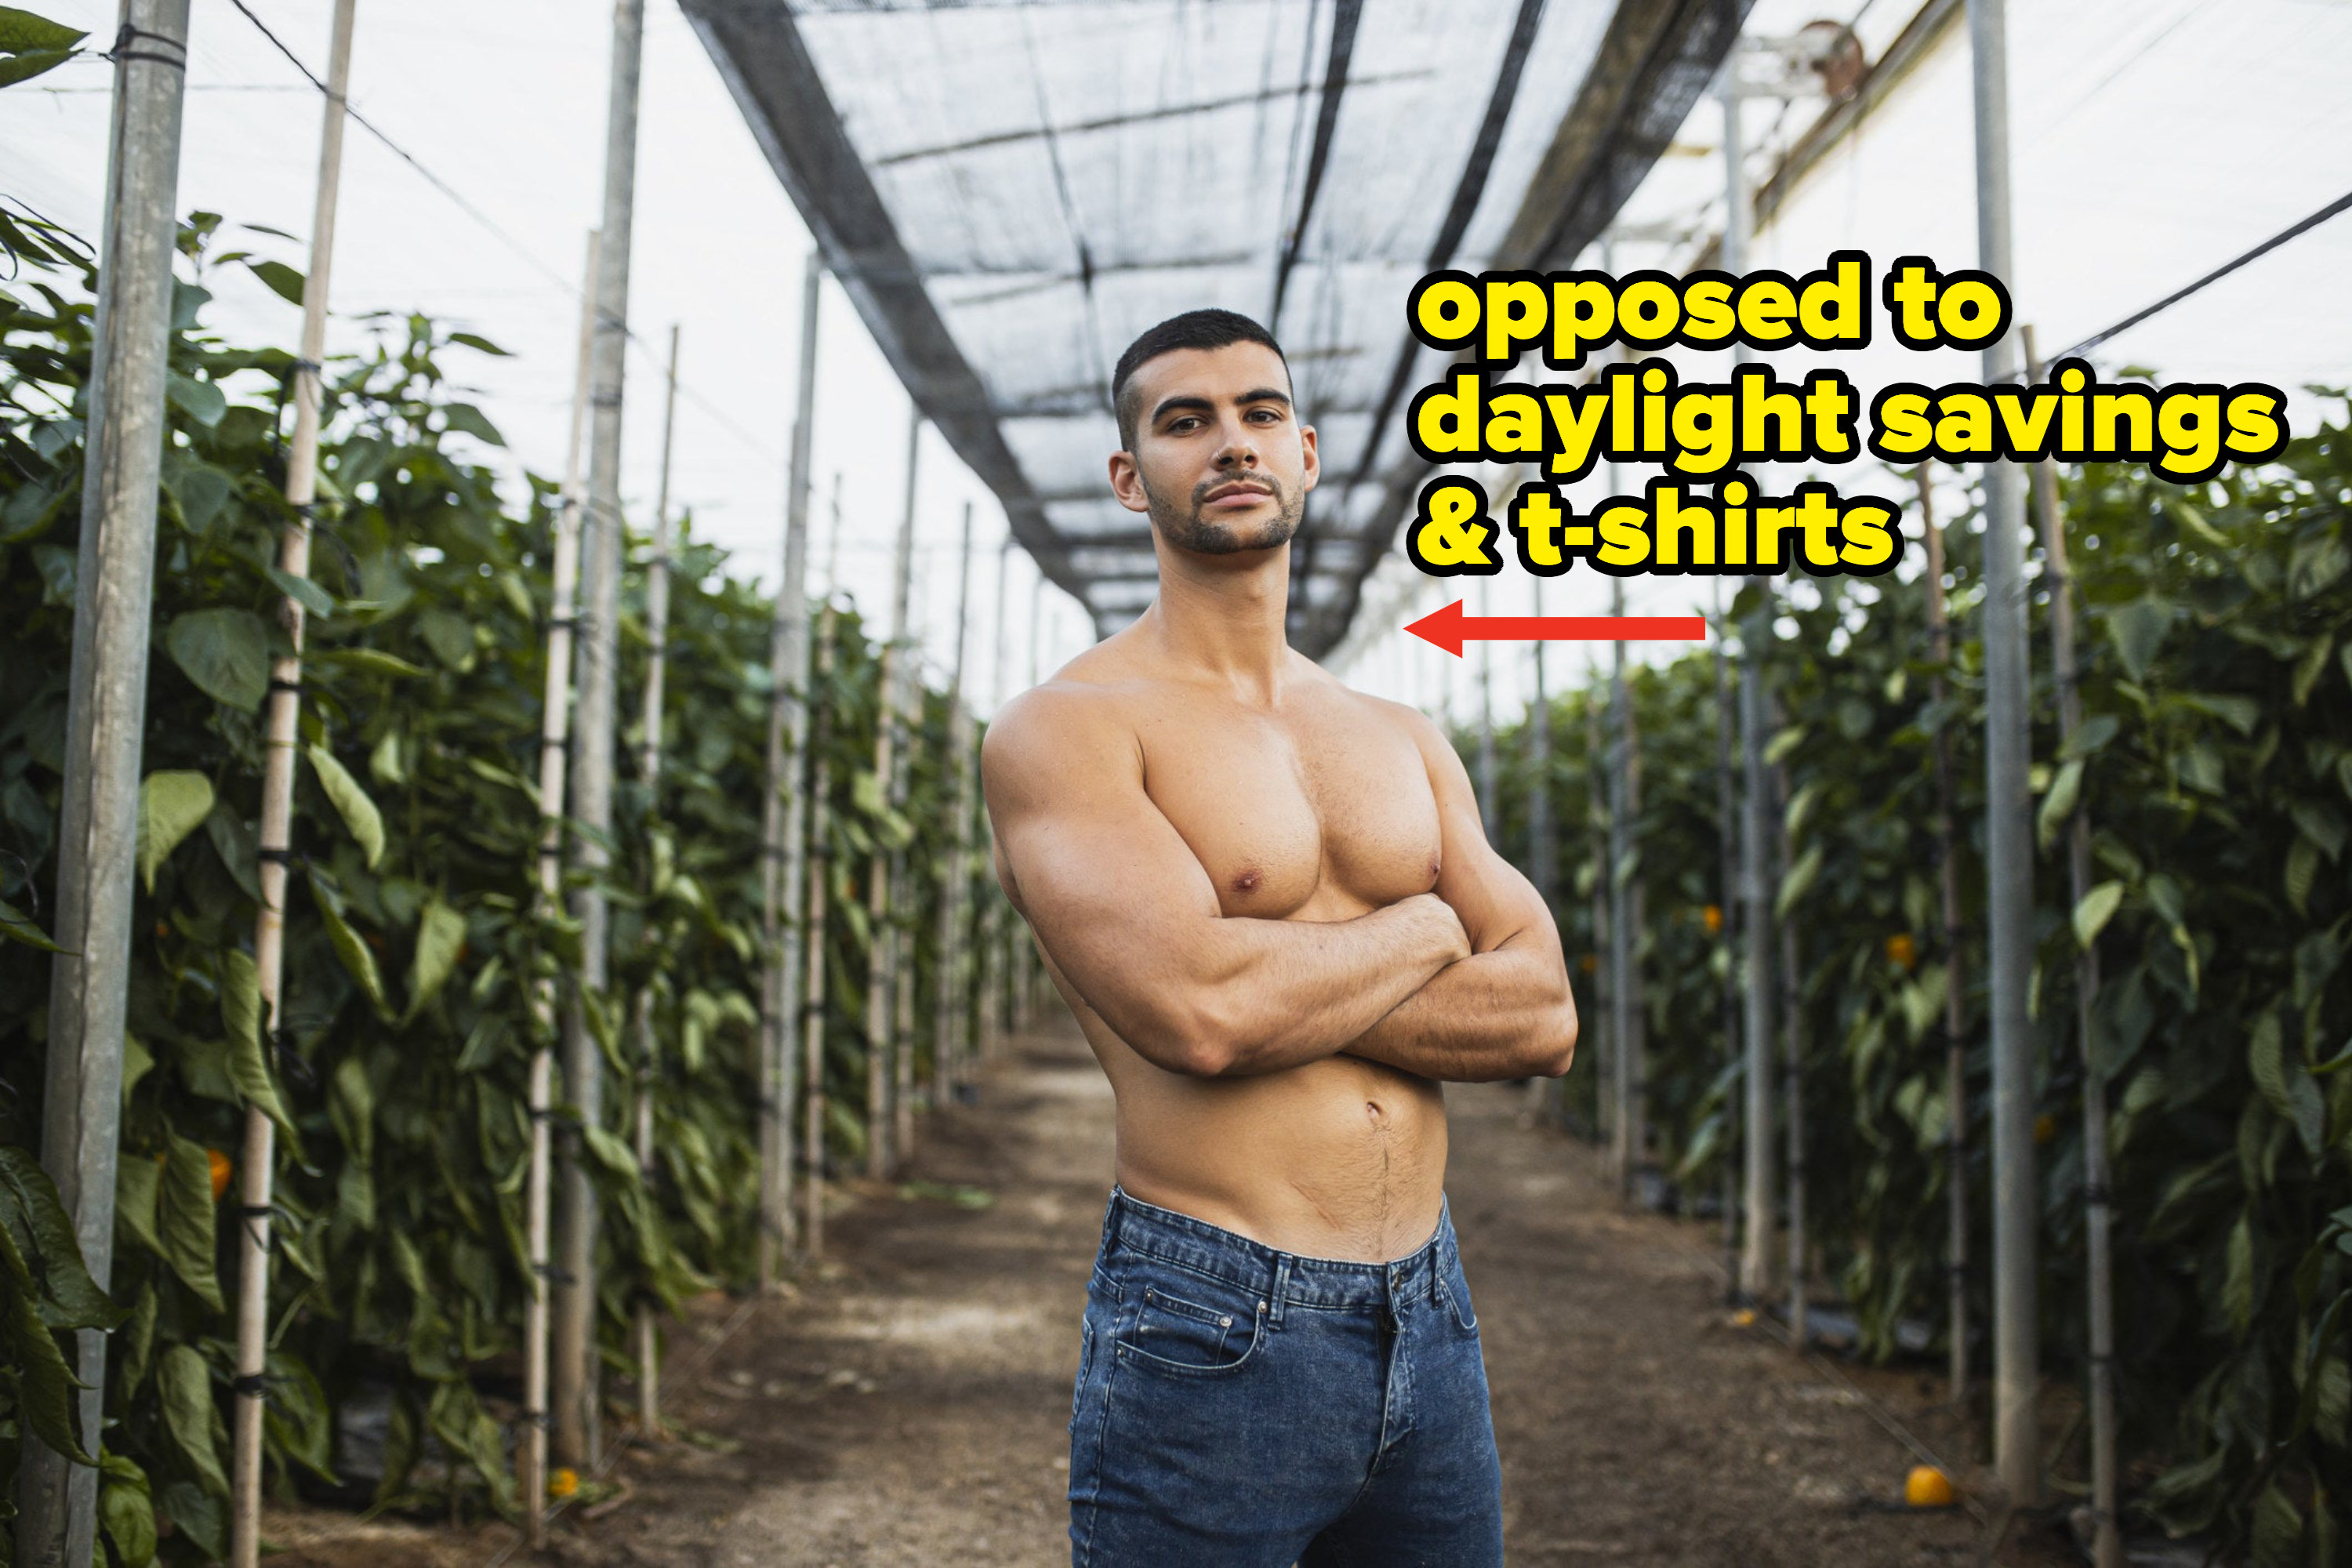 Young shirtless man standing with arms crossed at alley amid plants in greenhouse